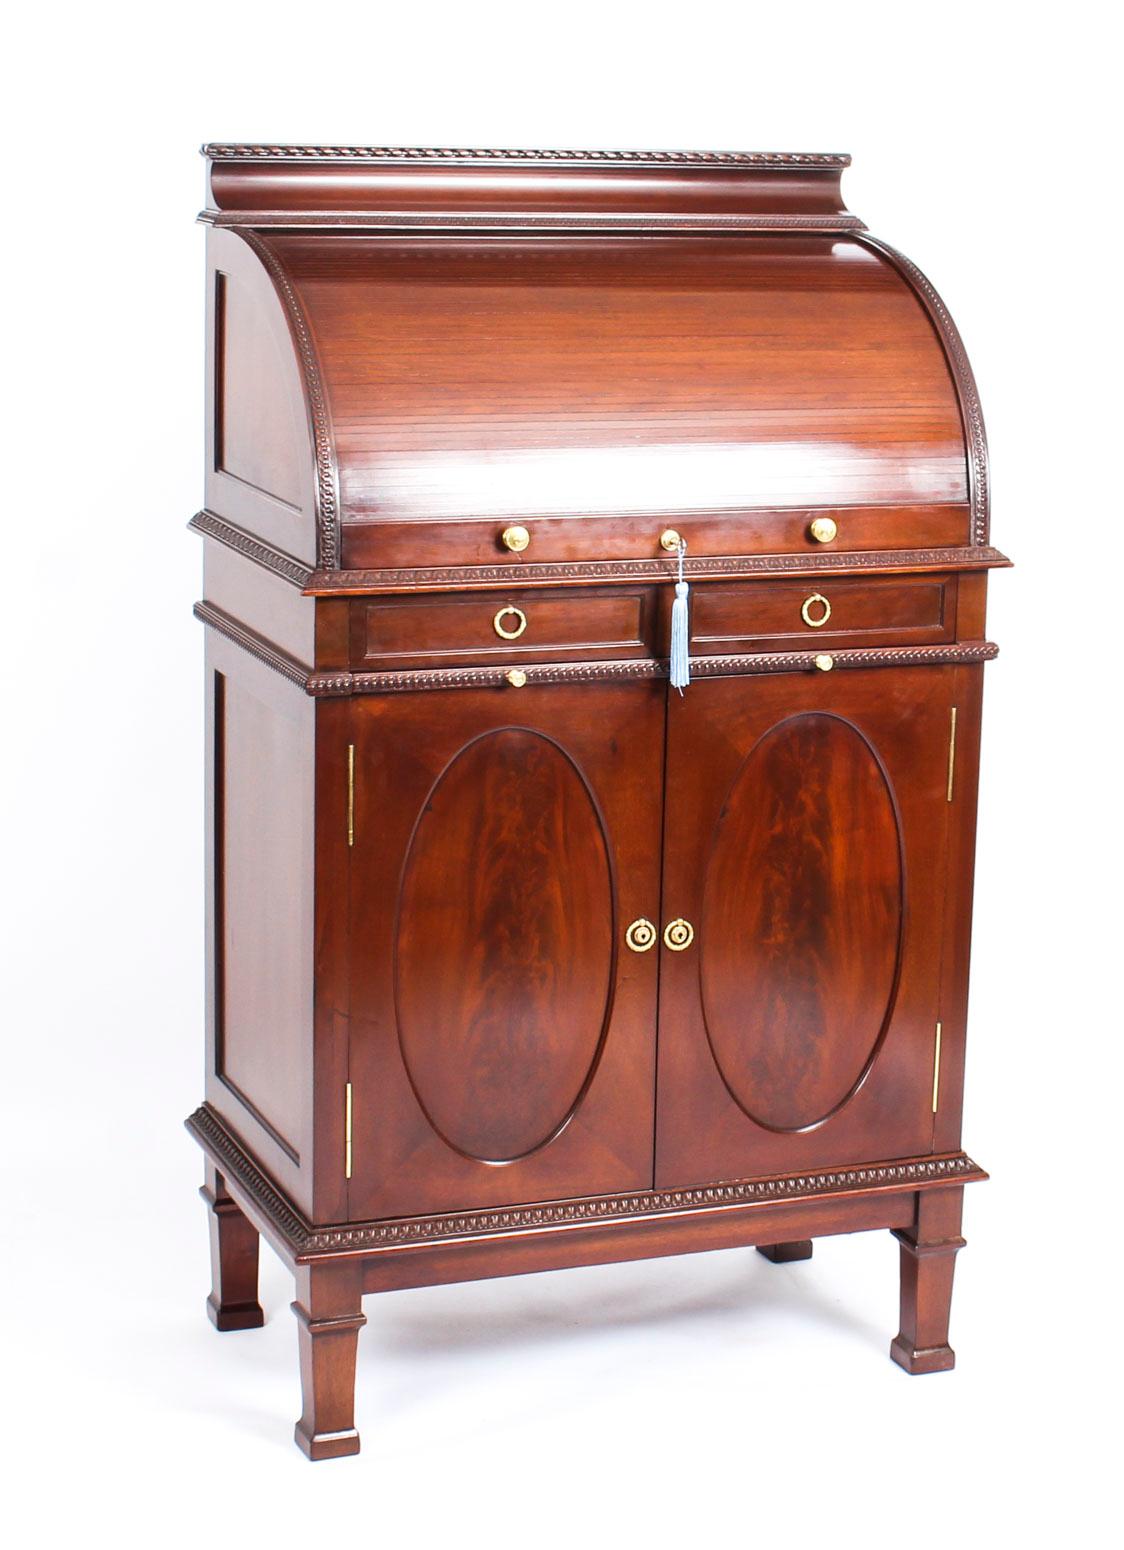 A superb flame mahogany drinks cabinet, by the renowned retailer Finnigans, Circa 1880 in date.

The upper section is fitted with a tambour slide opening to an onyx lined bar with bevelled mirror back, brass fittings, cut glass decanters and